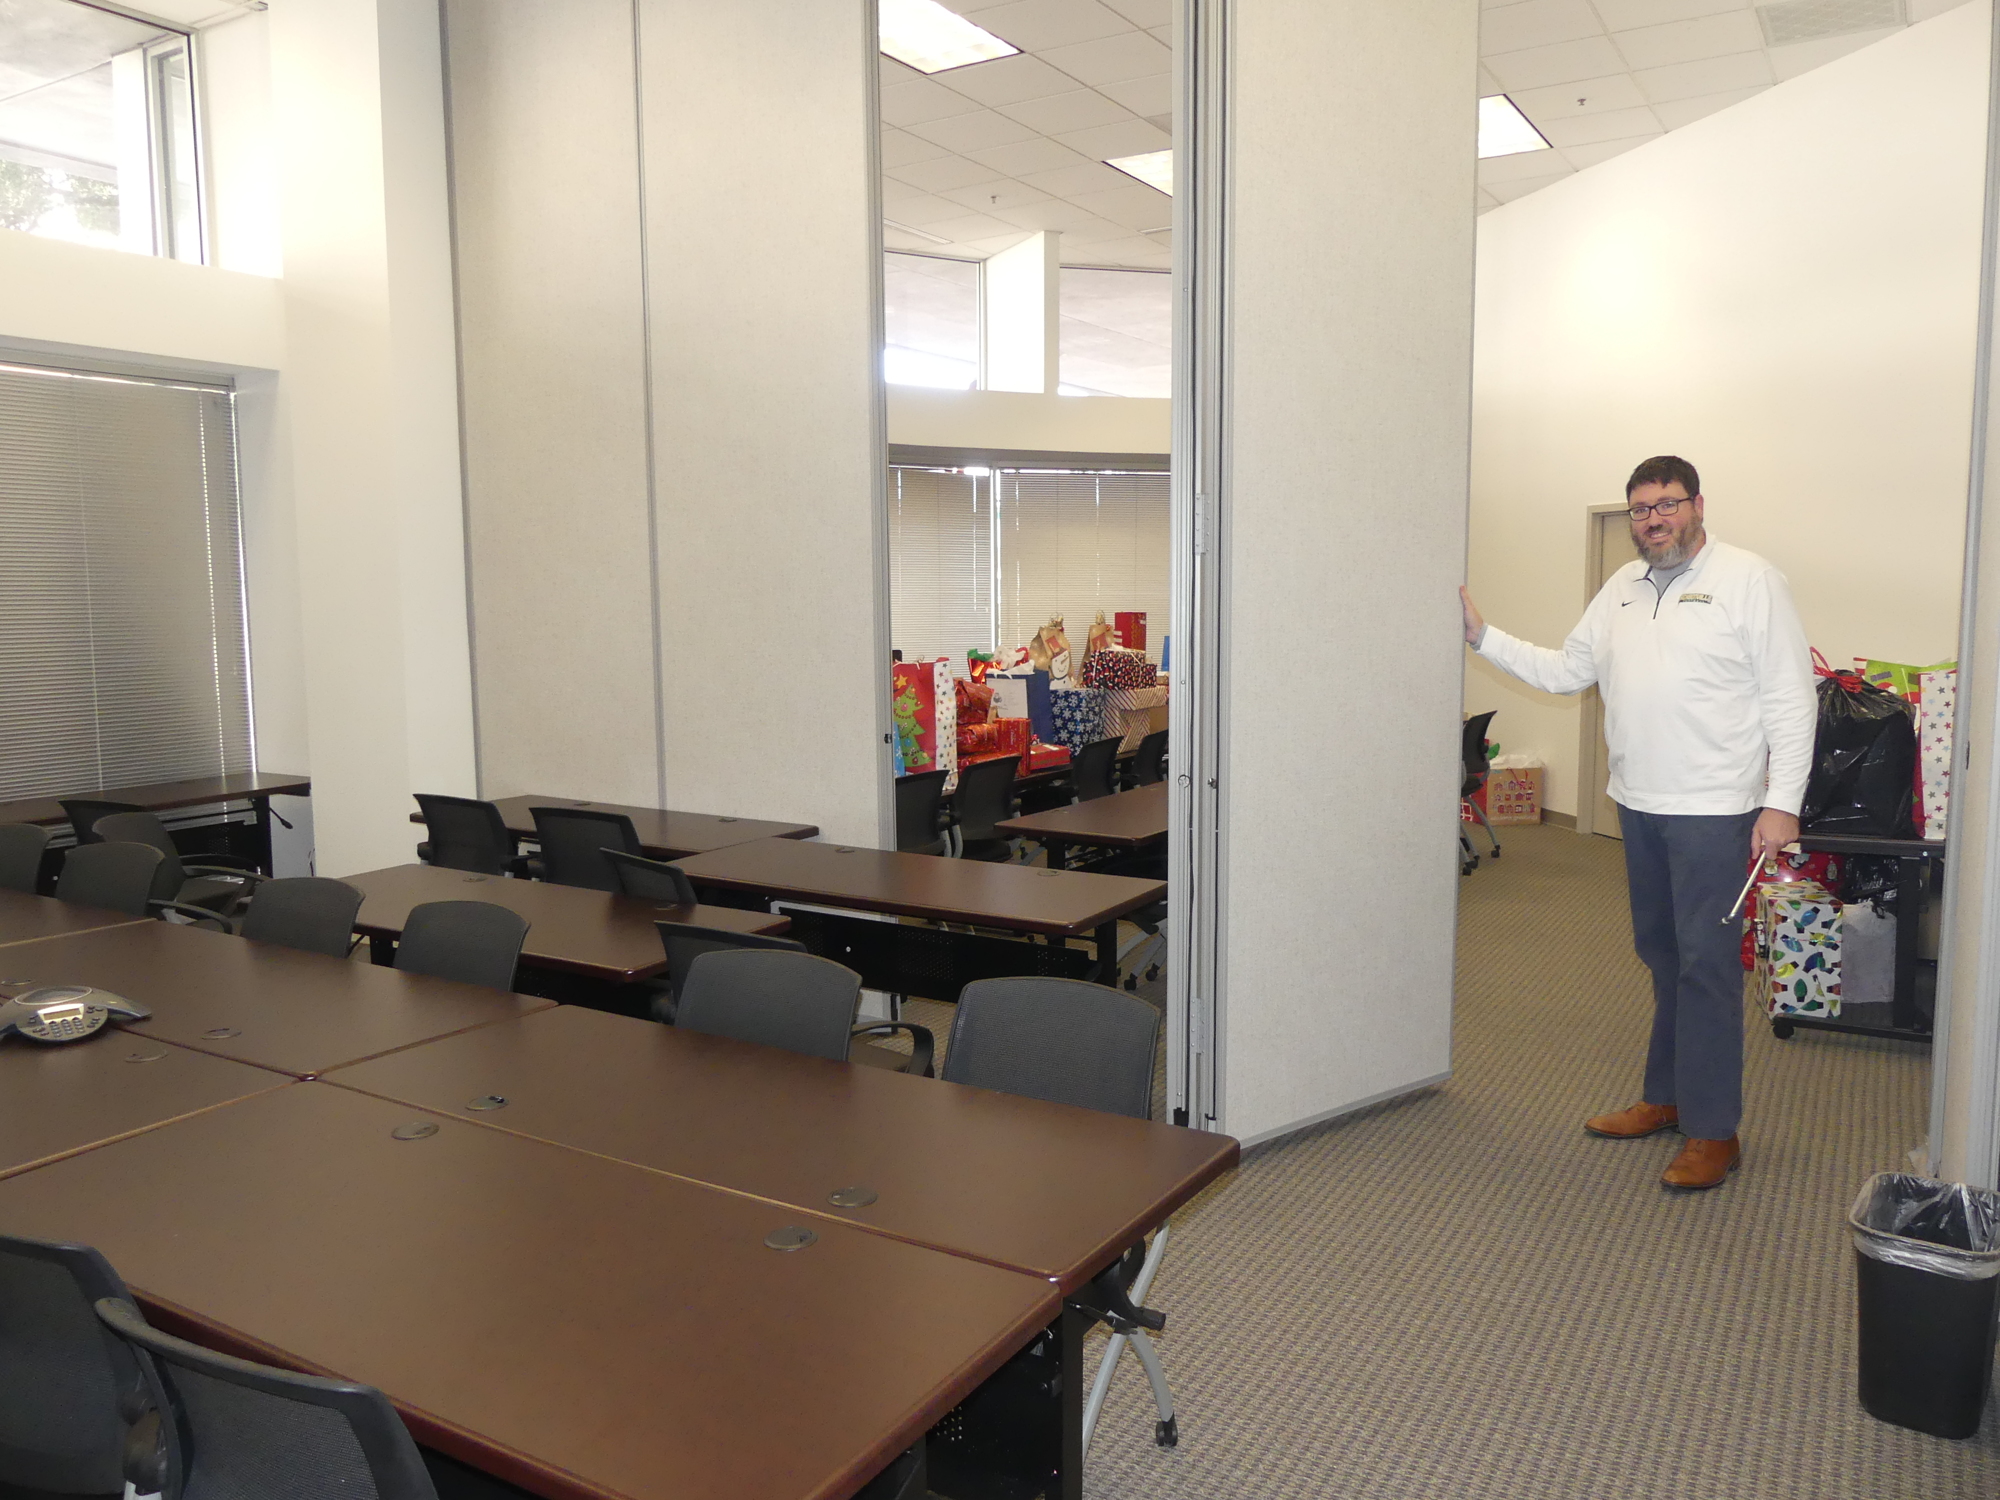 Jacksonville Bar Association Executive Director Craig Shoup setting up the flexible conference space at the association’s new offices to accommodate two simultaneous meetings.